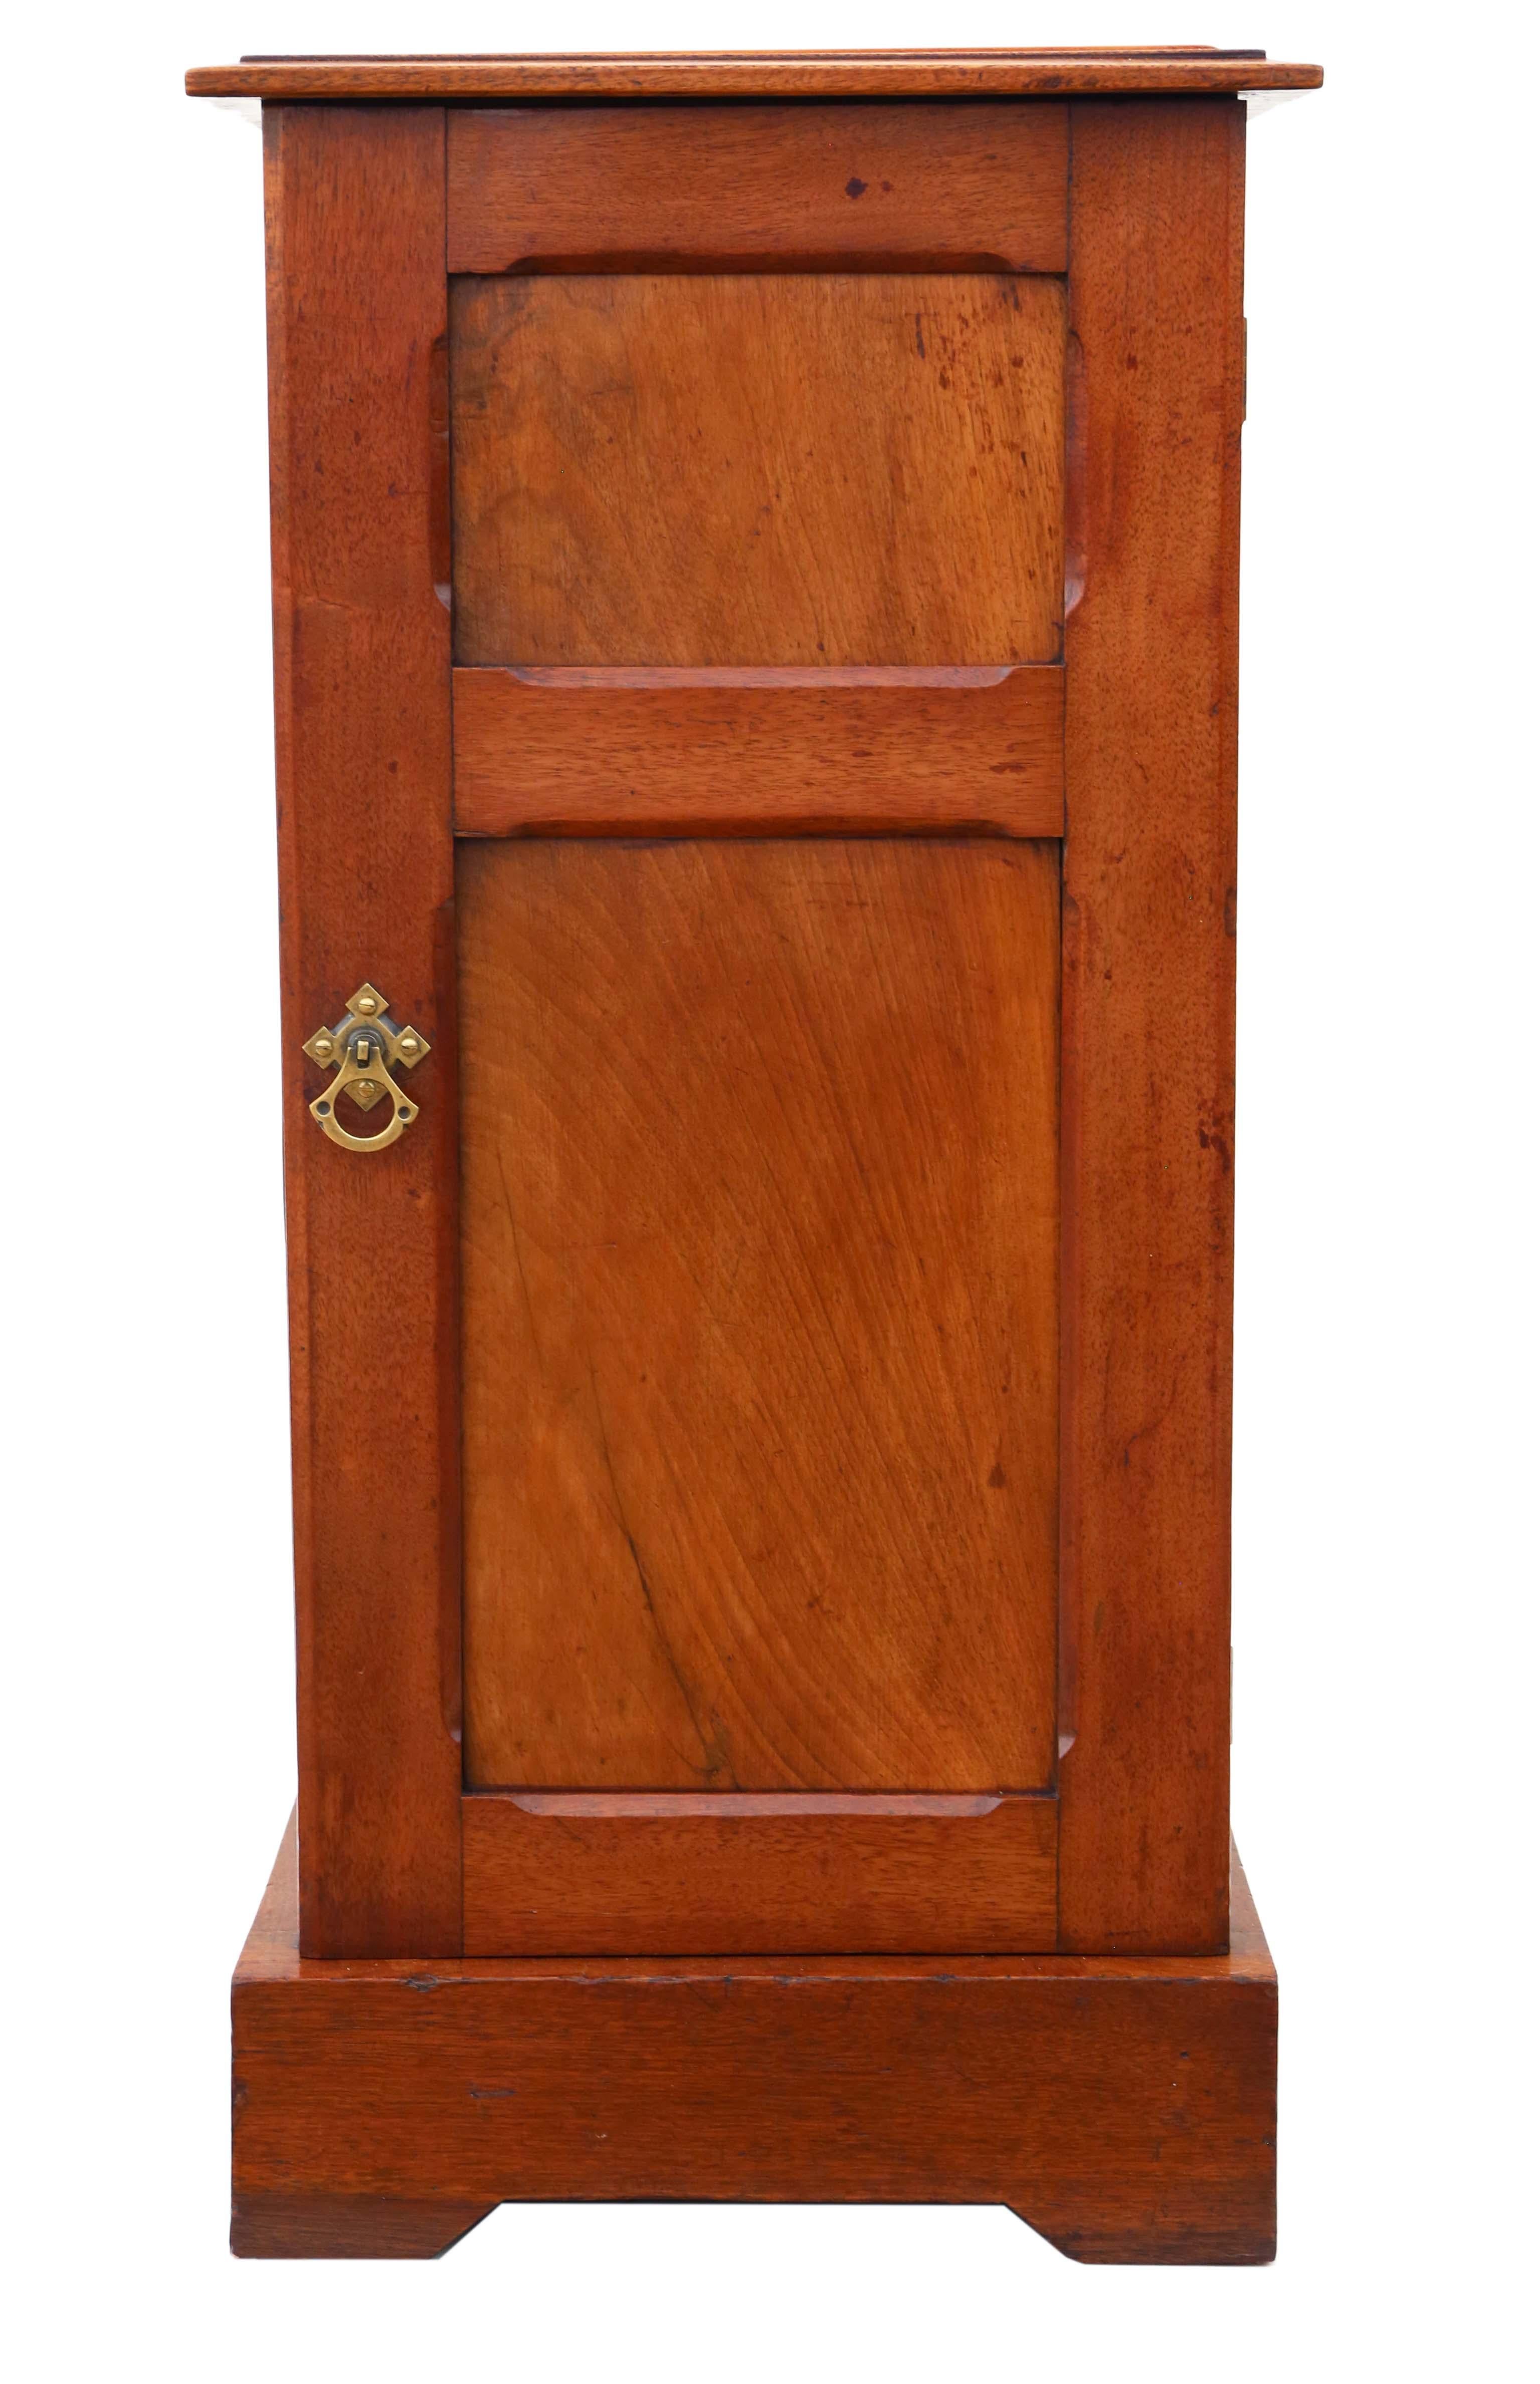 Antique quality Arts and Crafts late 19th Century mahogany nightstand, cupboard or bedside table.

Great item, which is solid and heavy with no loose joints. Attractive two panelled door with a brass handle and a later working catch.

Lovely age,